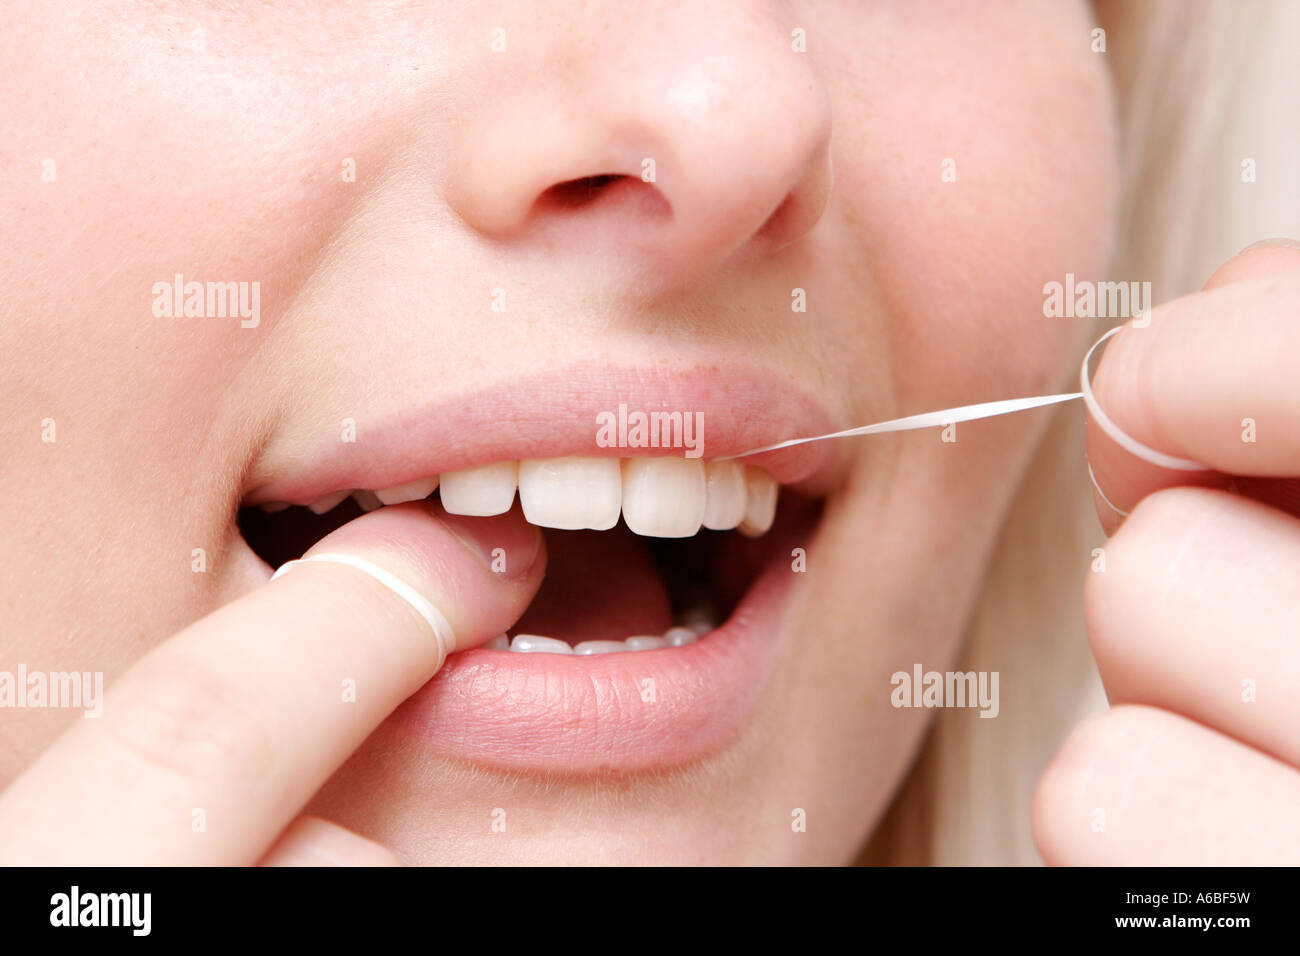 woman cleaning teeth with dental floss Stock Photo